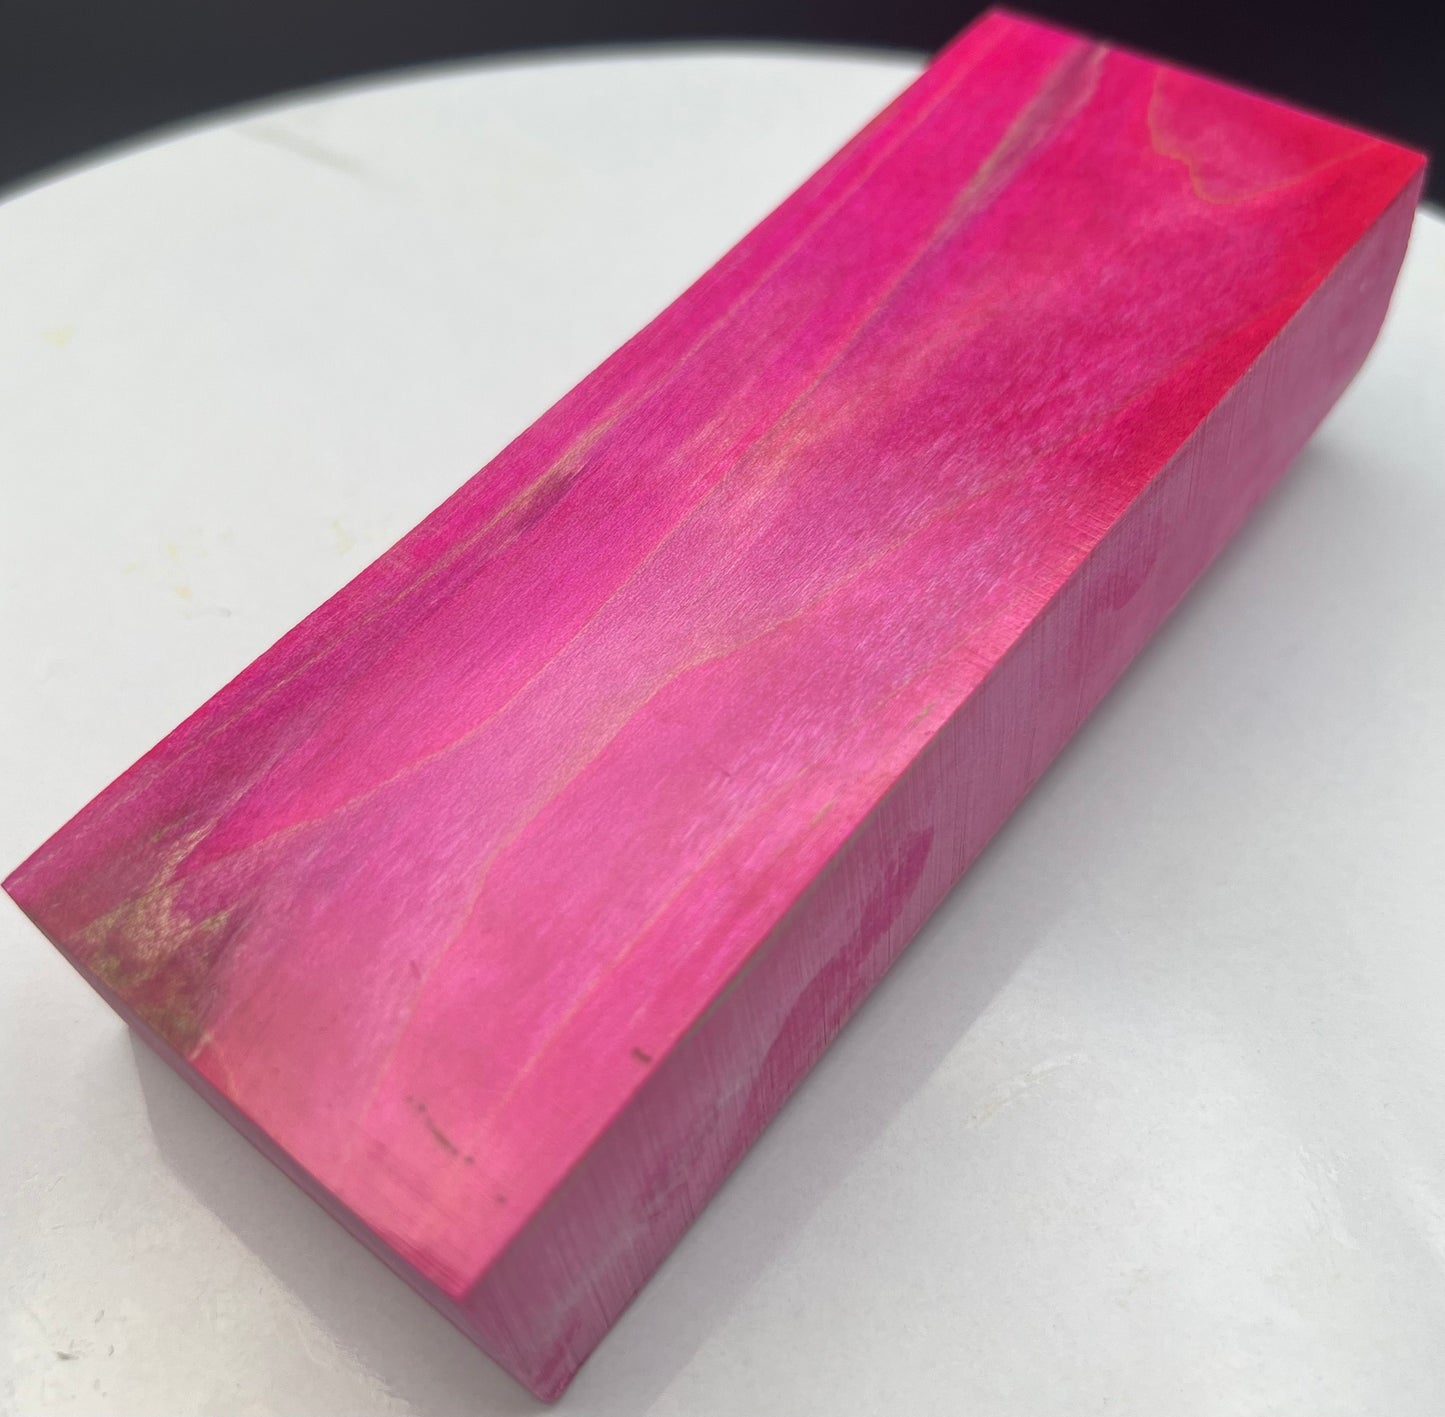 Stabilized Curly Maple Knife Block Hot Pink